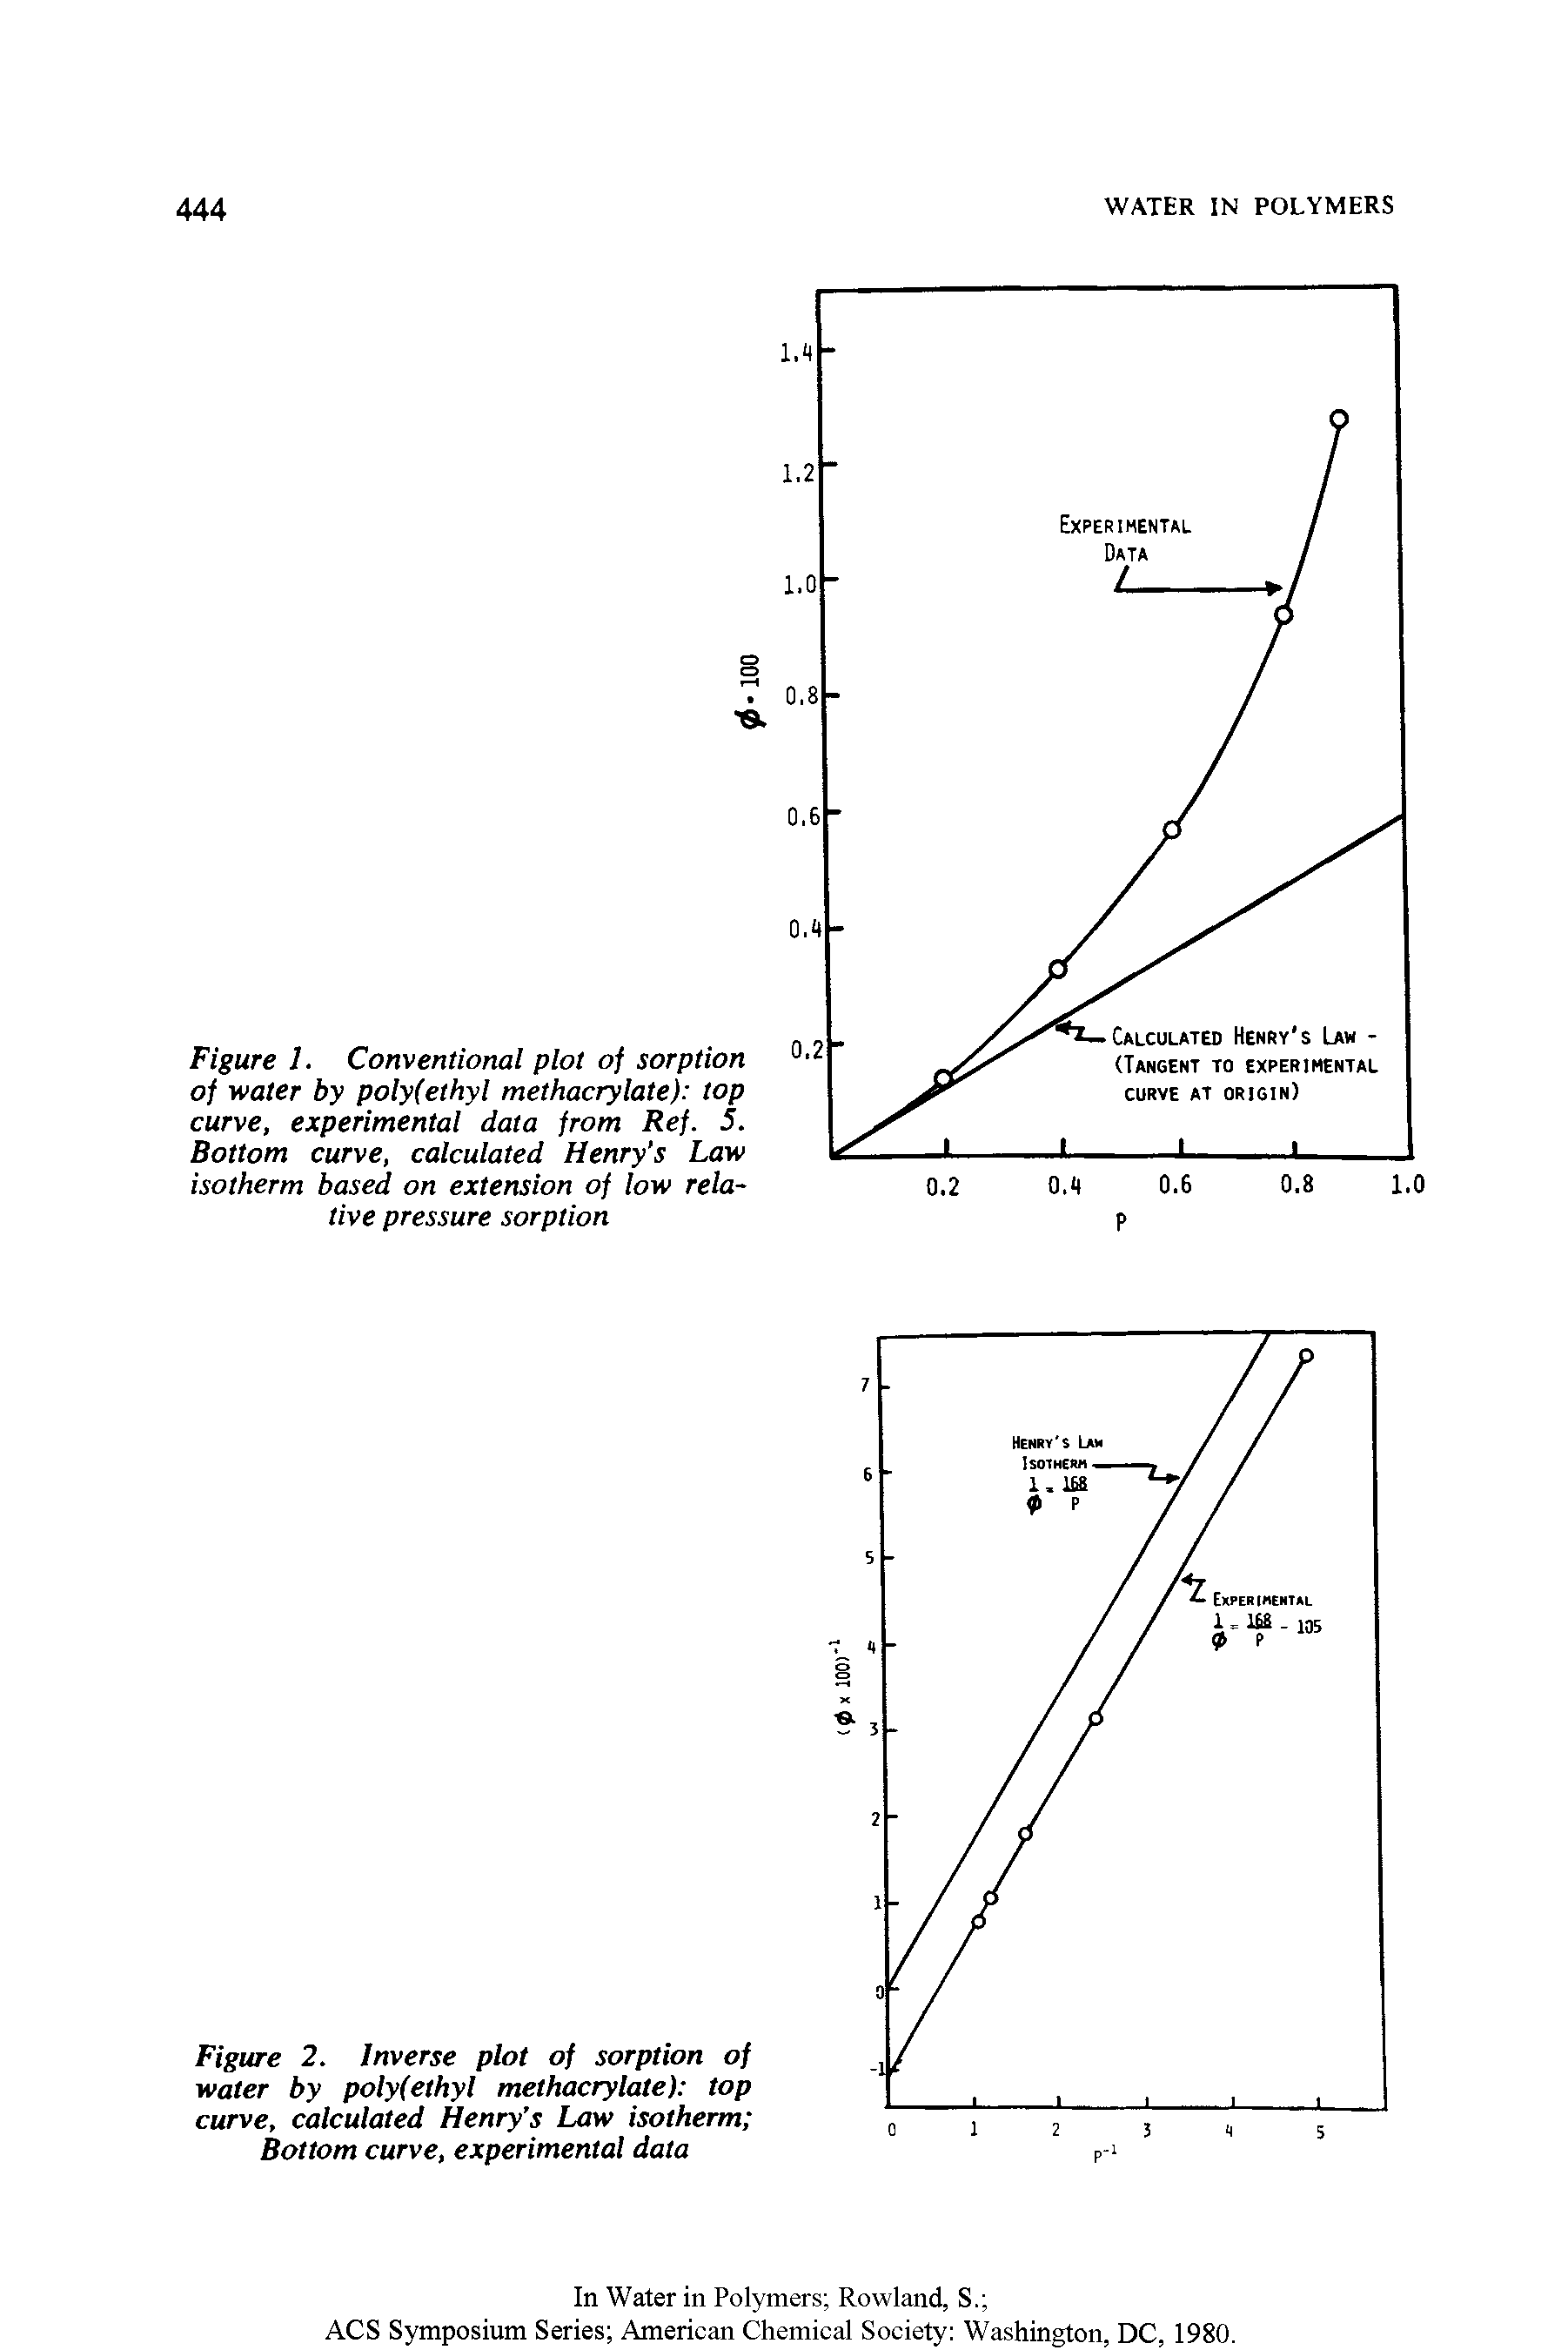 Figure 1. Conventional plot of sorption of water by poly(ethyl methacrylate) top curve, experimental data from Ref. 5. Bottom curve, calculated Henry s Law isotherm based on extension of low relative pressure sorption...